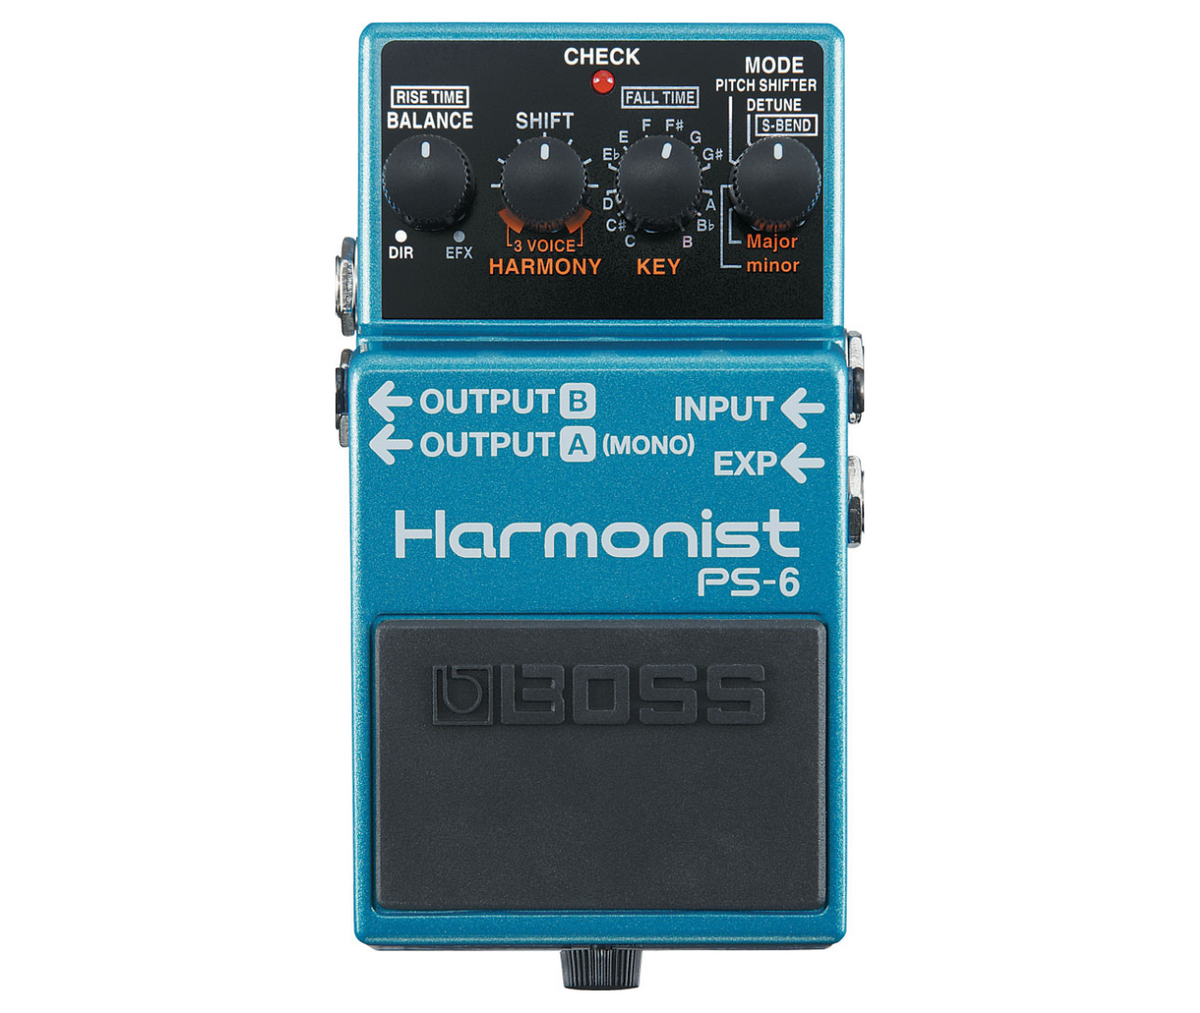 BOSS PS-6 Harmonist Best Guitar Effects Pedal with 4 Pitch-shift Effects and 3-Voice Harmony Extreme Pitch Bending